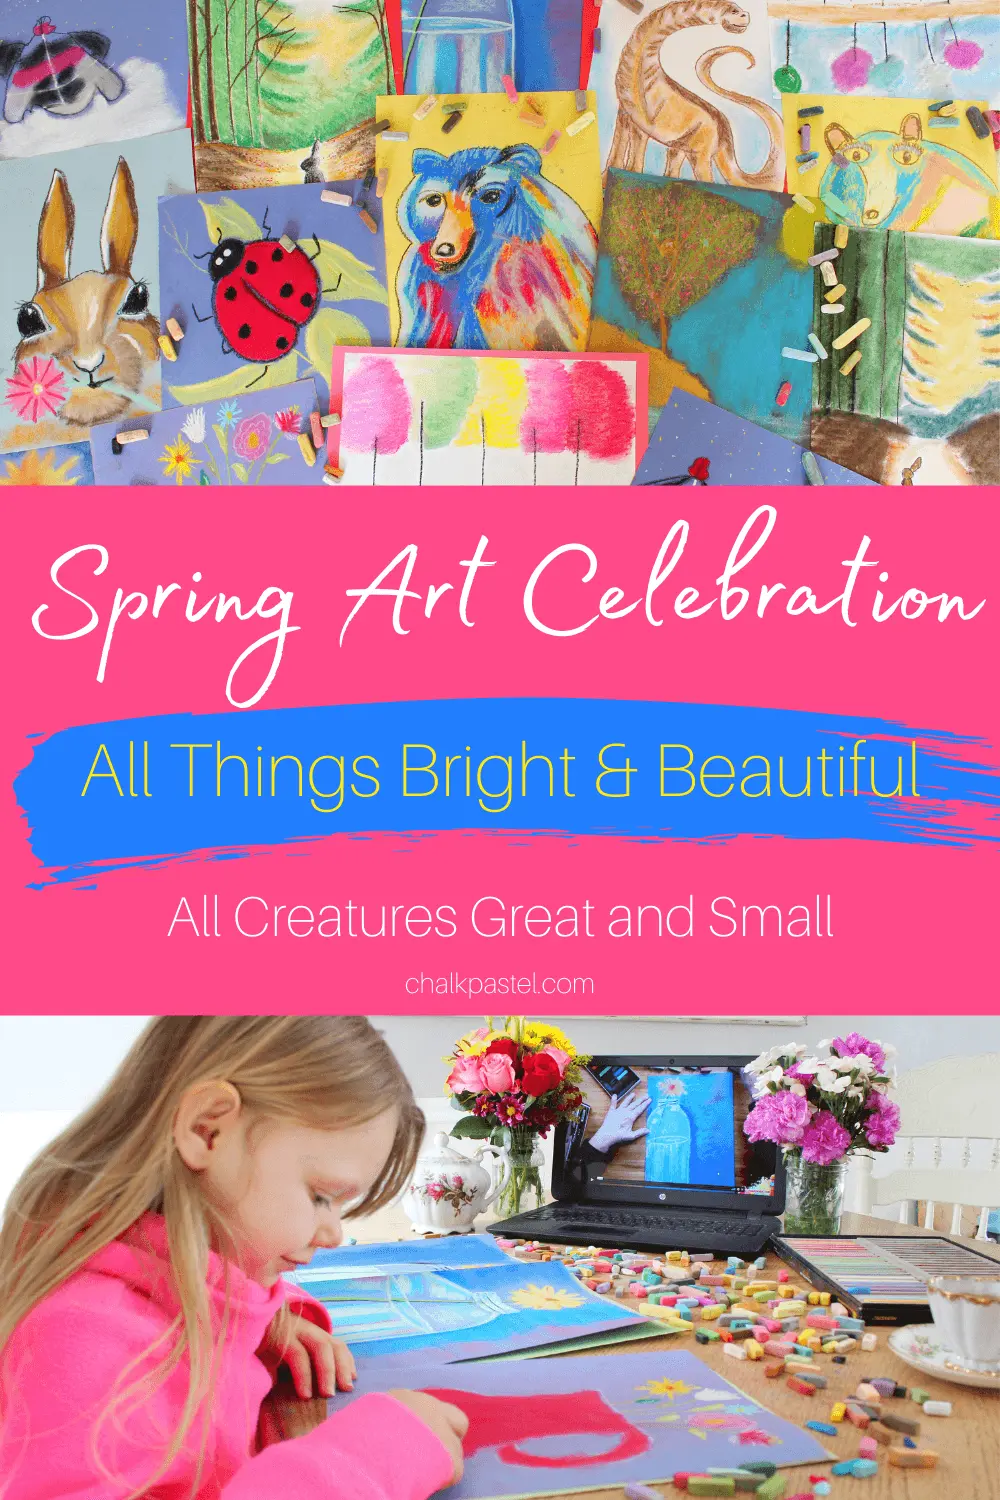 Spring Art Celebration with Chalk Pastels: Perfect for commemorating spring, Nana's spring art celebration with chalk pastels explores all creatures great and small and all things bright and beautiful! These nature-inspired art lessons are easy and fun for the whole family! #springartcelebration #springartwithchalkpastels #chalkpastelartforkids #chalkpastelspringart #springart #springartforkids #springchalkpastels
#springchalkpastelsforkids